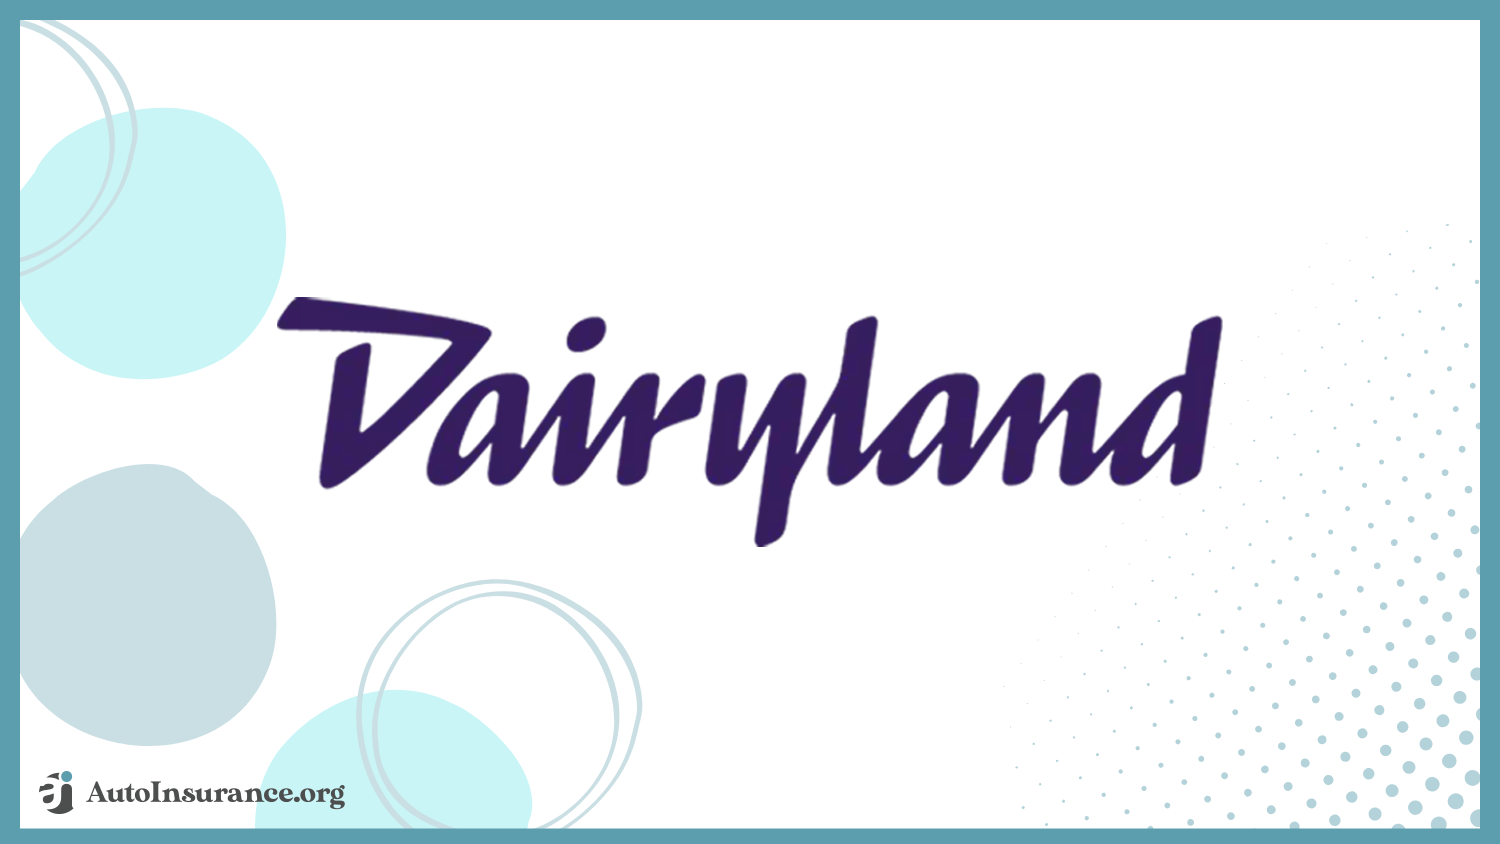 dairyland Best Auto Insurance For Diplomats